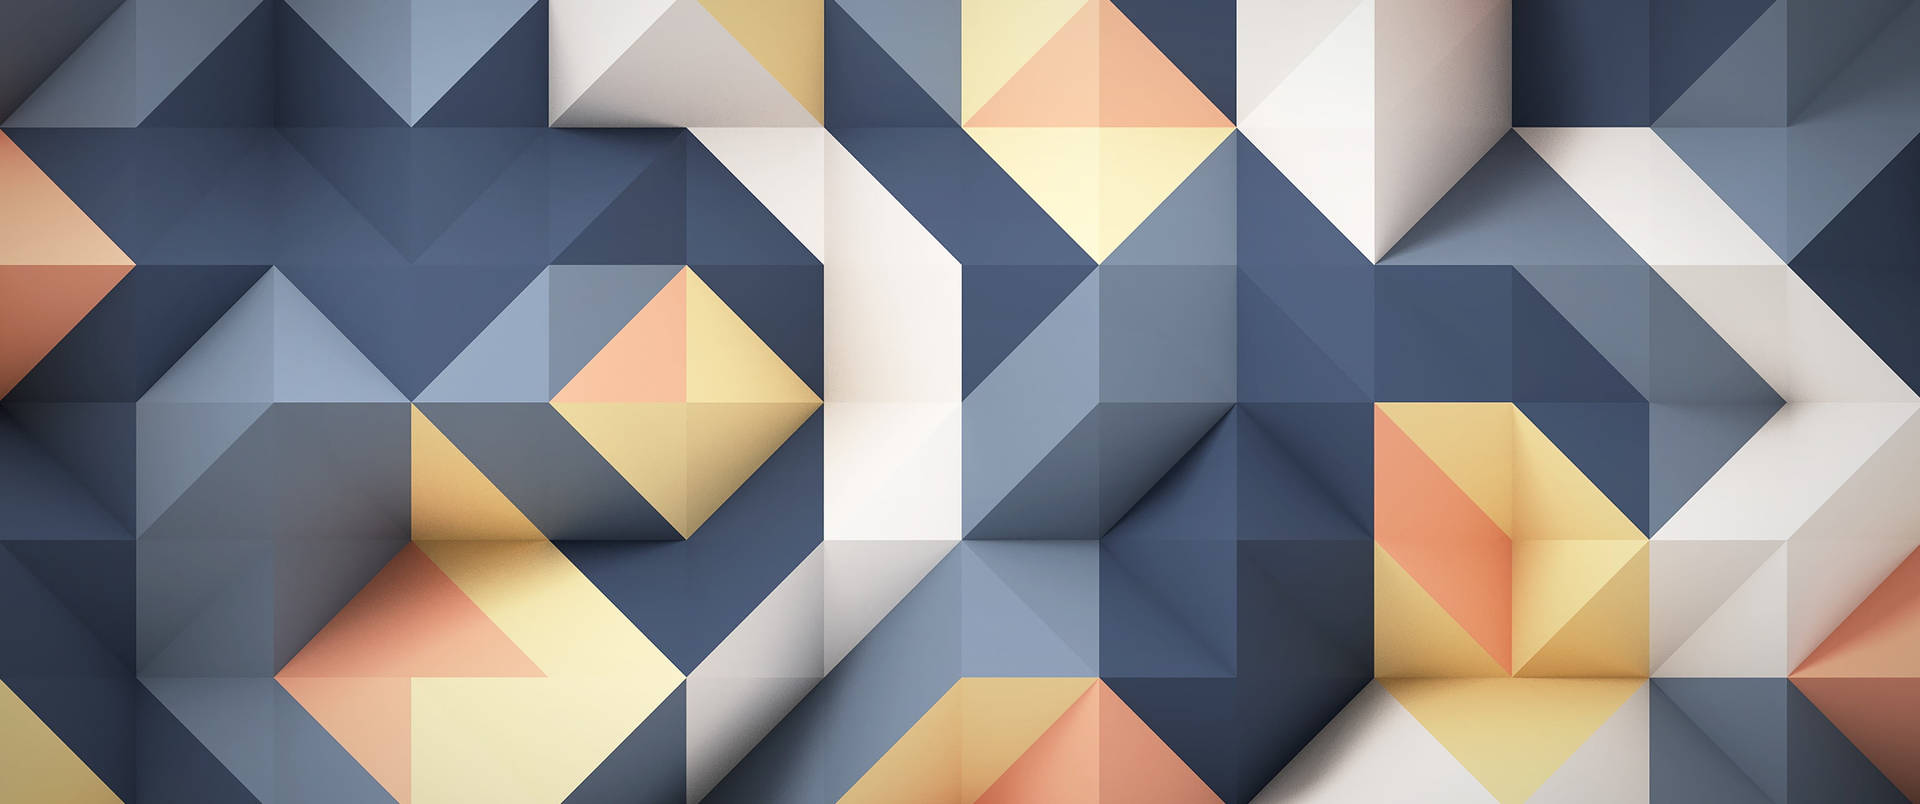 Gray And Yellow Platonic Solids Abstract Wallpaper